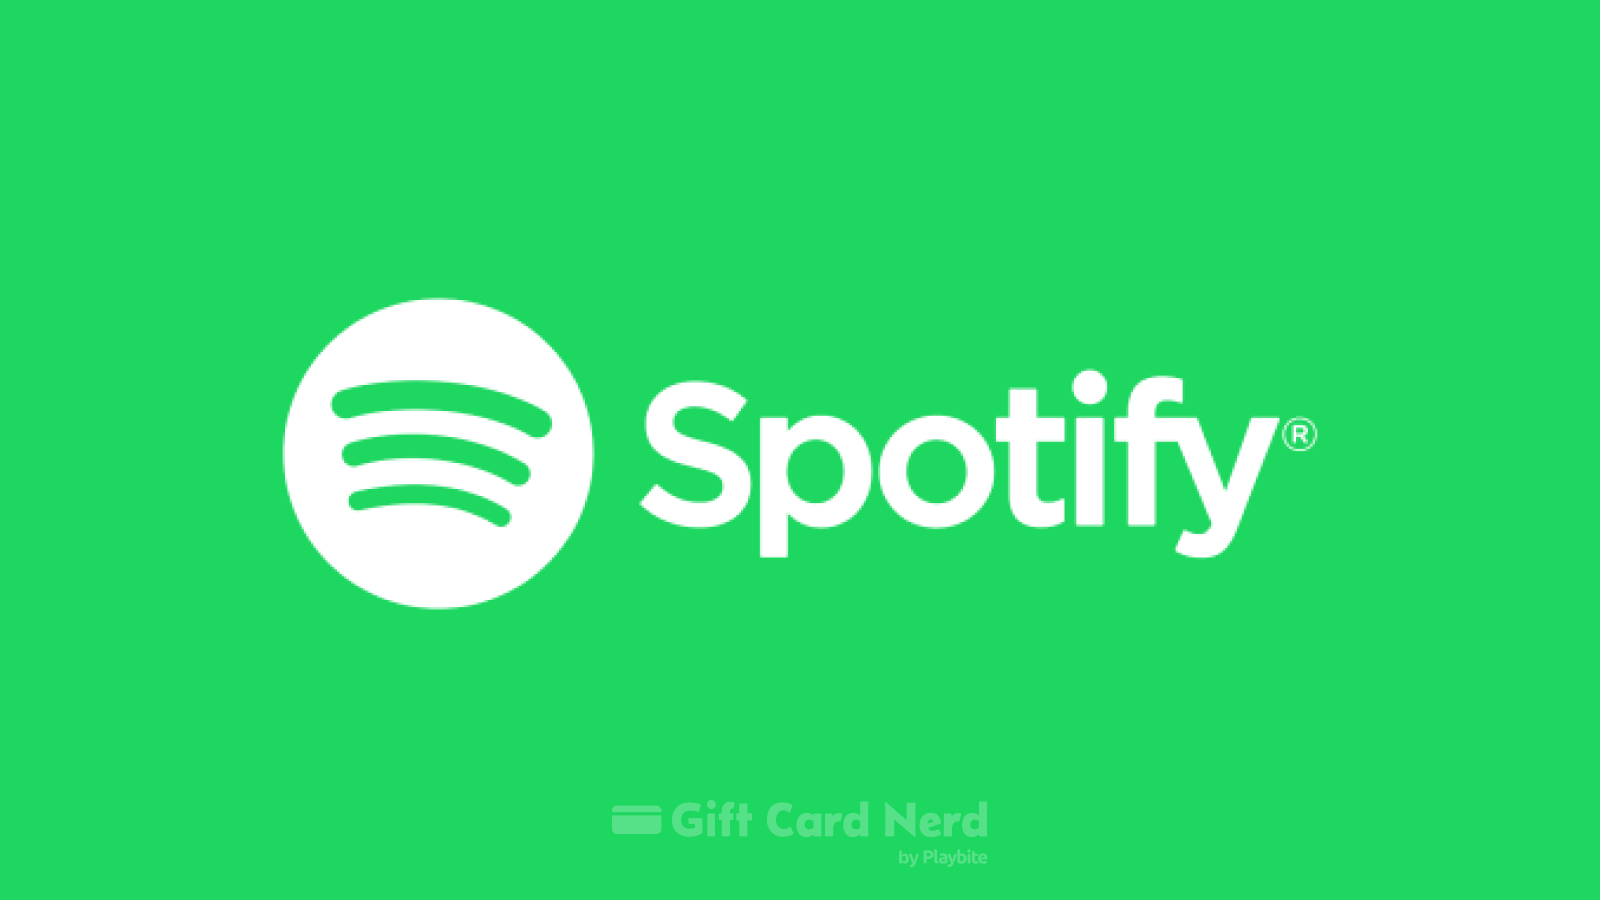 Can I Use a Spotify Gift Card on Google Play Store?